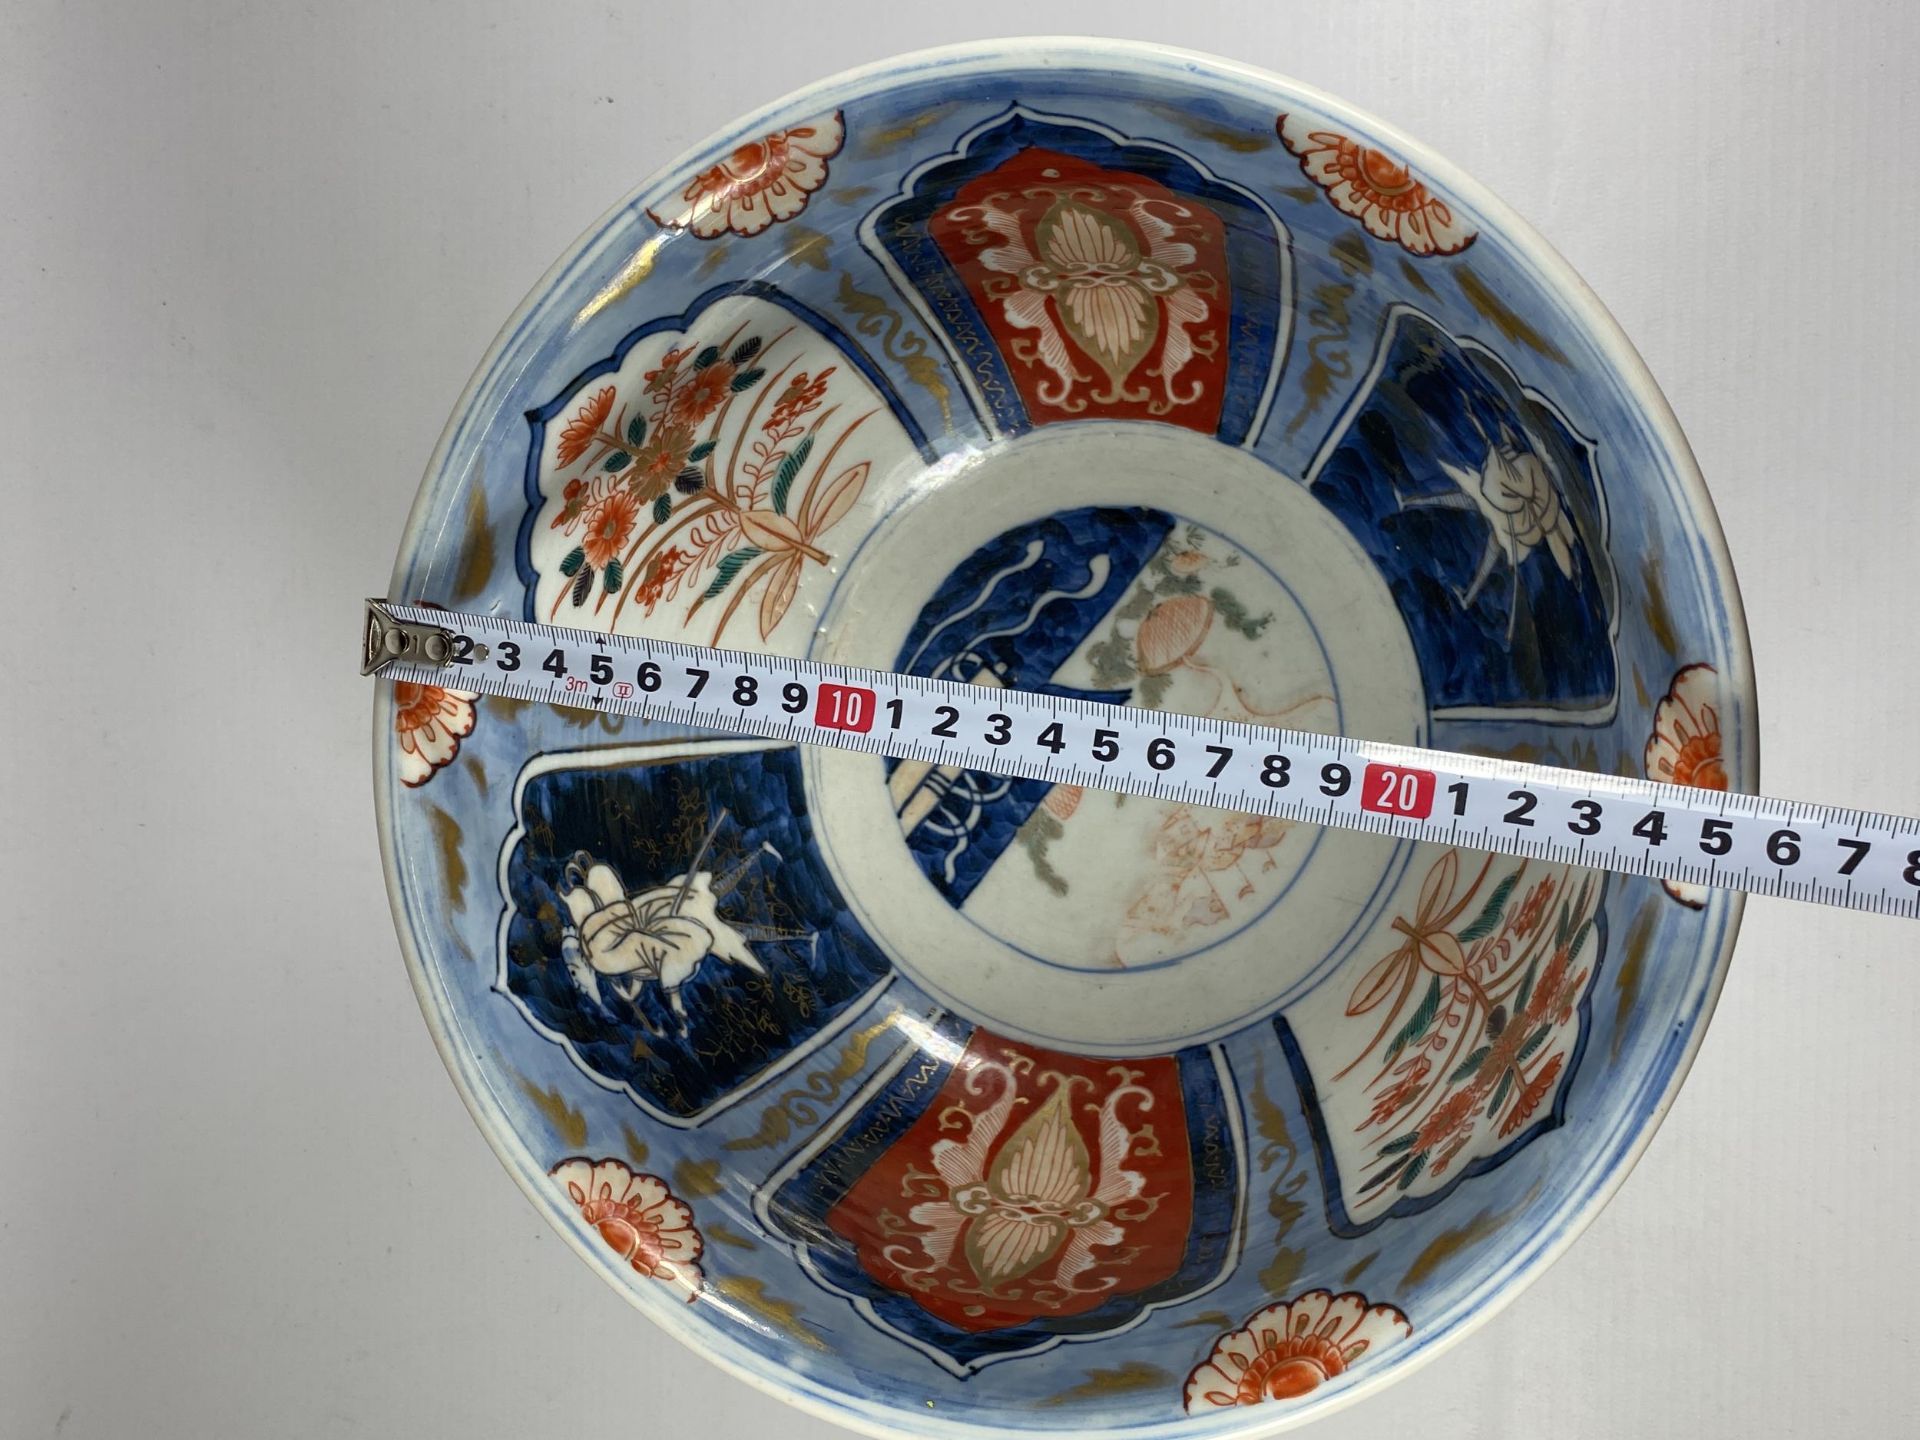 A LARGE JAPANESE MEIJI PERIOD (1868-1912) IMARI BOWL WITH SIX CHARACTER MARK TO BASE, DIAMETER 25. - Image 8 of 8